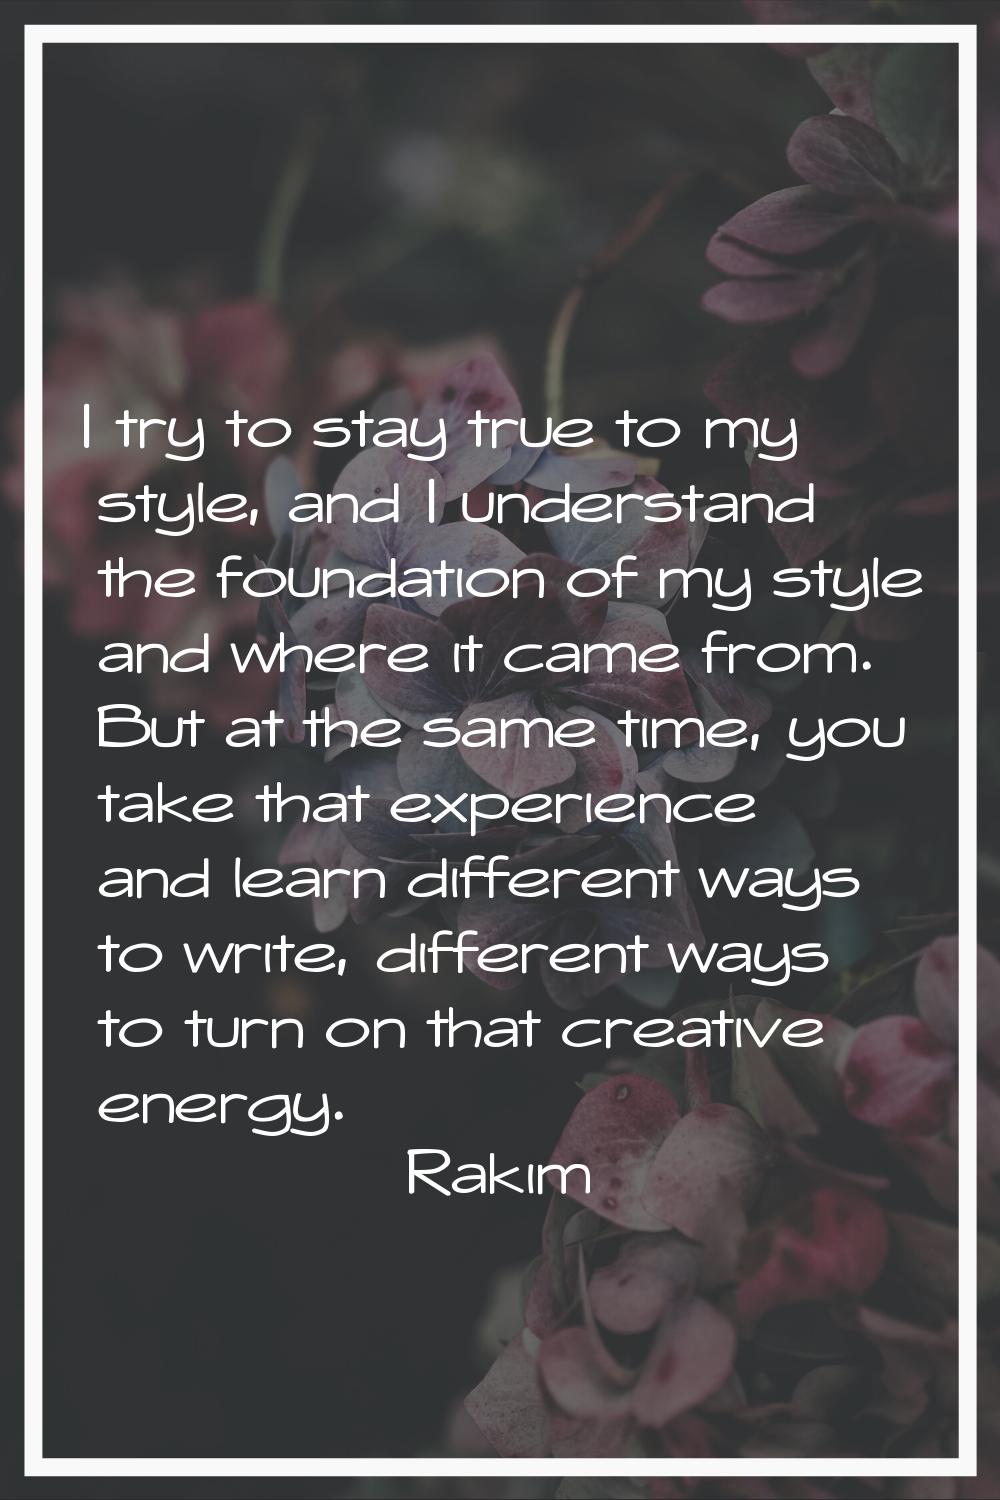 I try to stay true to my style, and I understand the foundation of my style and where it came from.